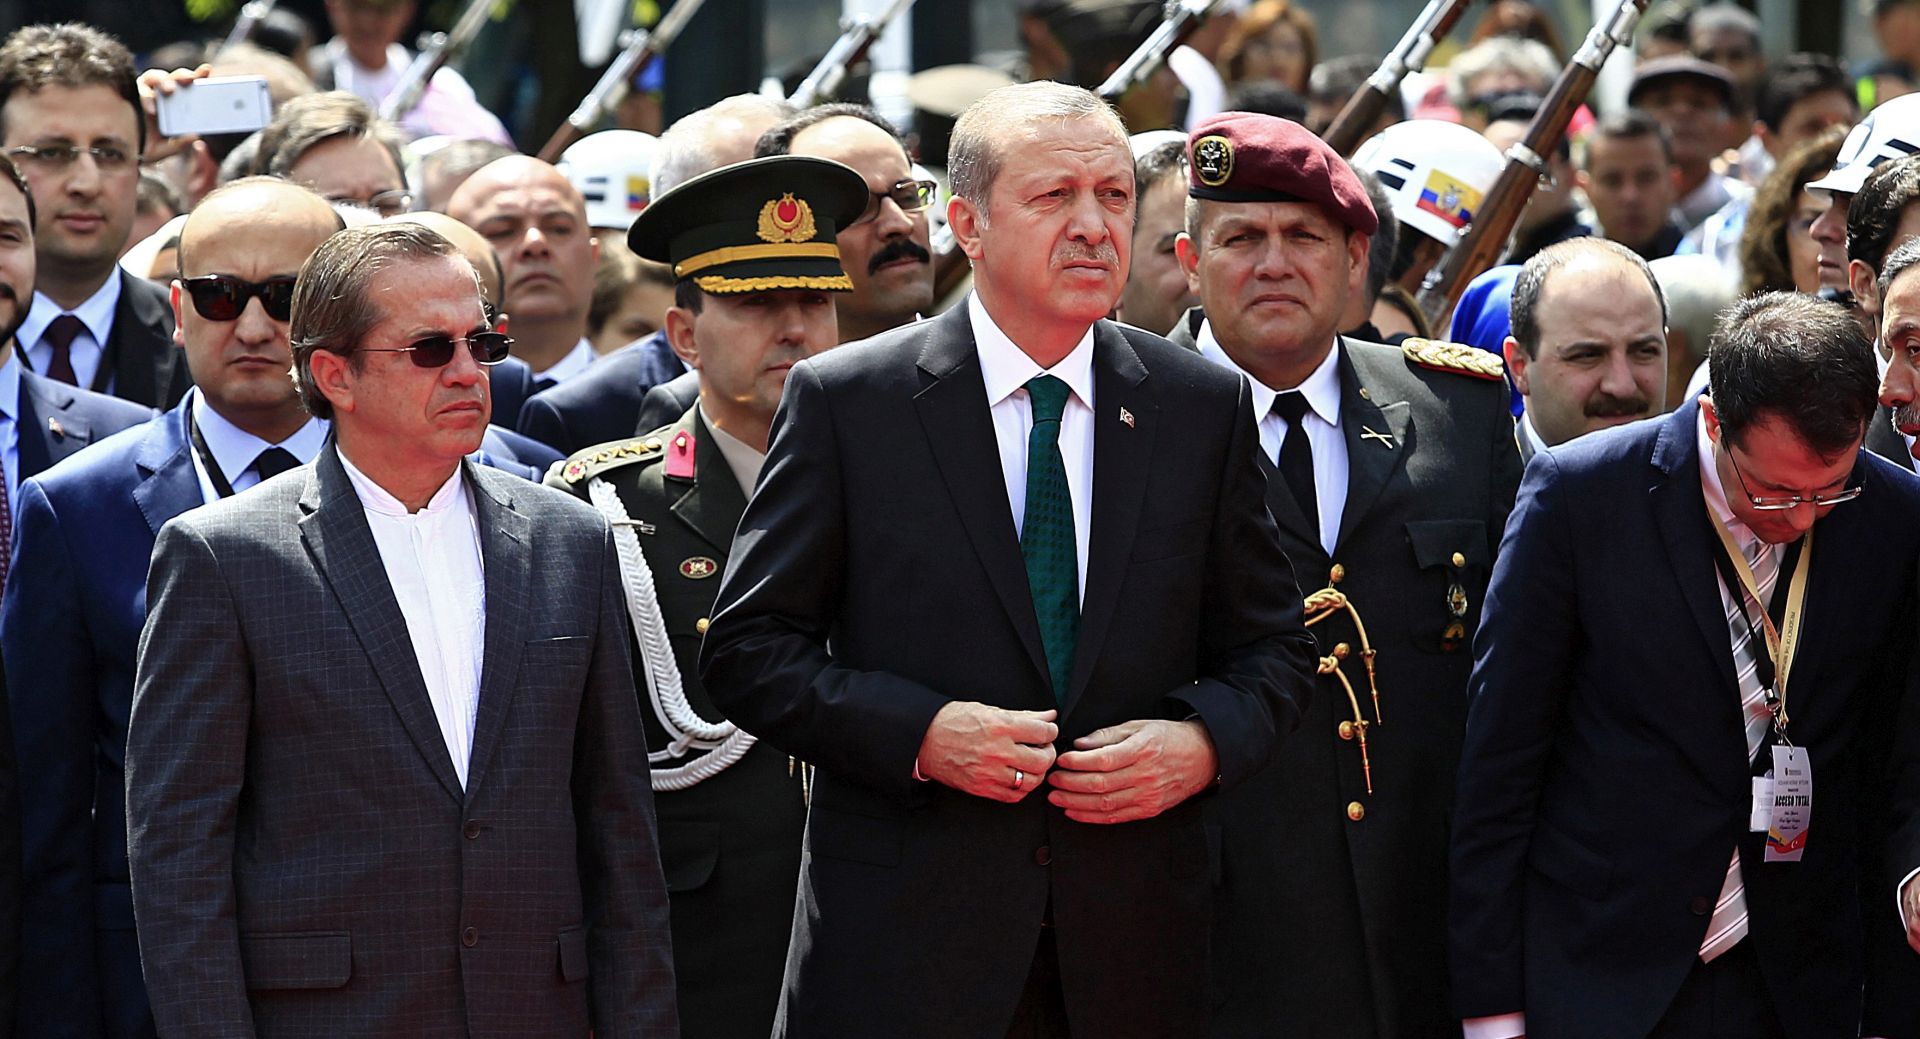 epa05143186 Ecuadorean Foreign Minister Ricardo Patino (L) accompanied by Turkish President Recep Tayyip Erdogan (C) during a ceremony to lay a wreath at monument to Heroes de la Independencia in the historic center of Quito, Ecuador, 04 February 2016. Erdogan is in Ecuador to boost bilateral ecopnomic ties.  EPA/JOSE JACOME